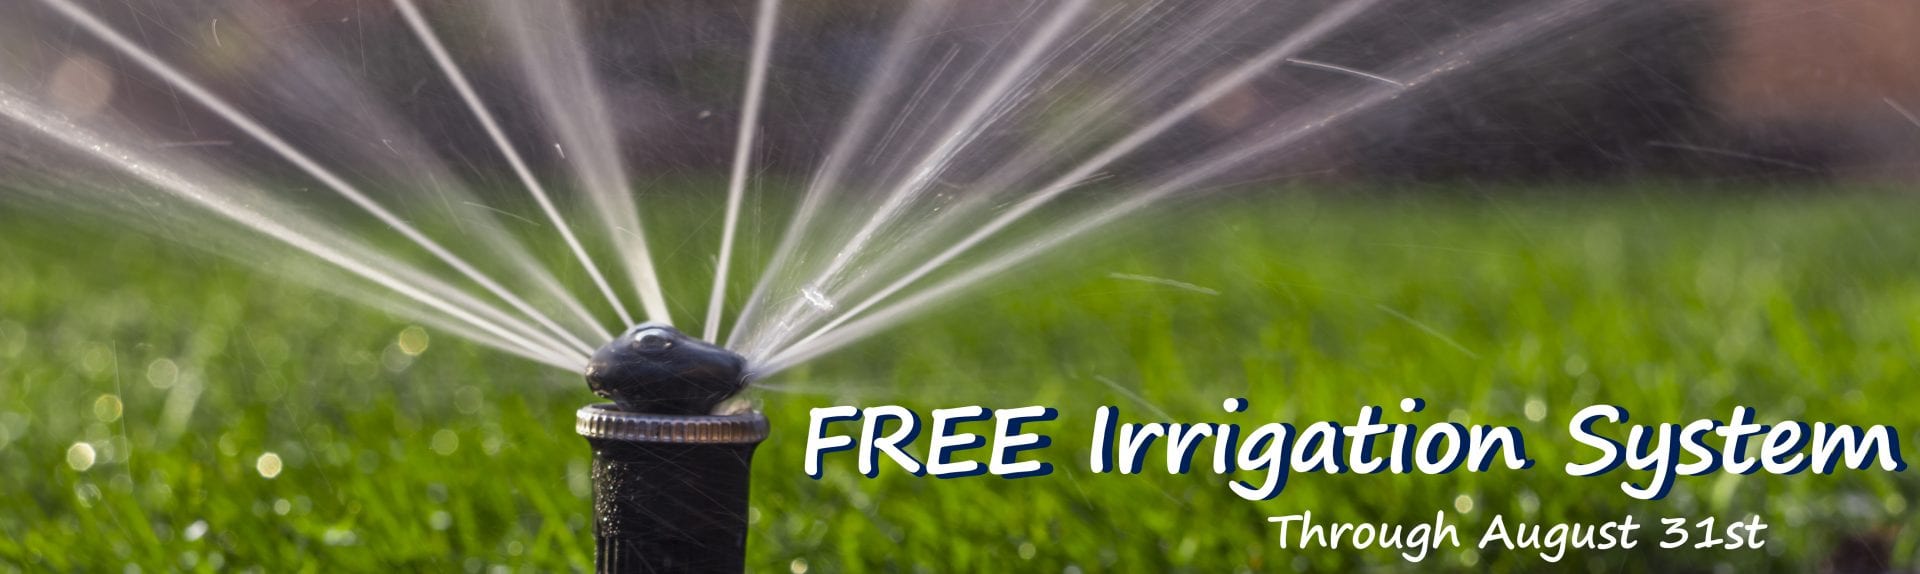 Automatic Sprinkler System Watering The Lawn On A Background Of